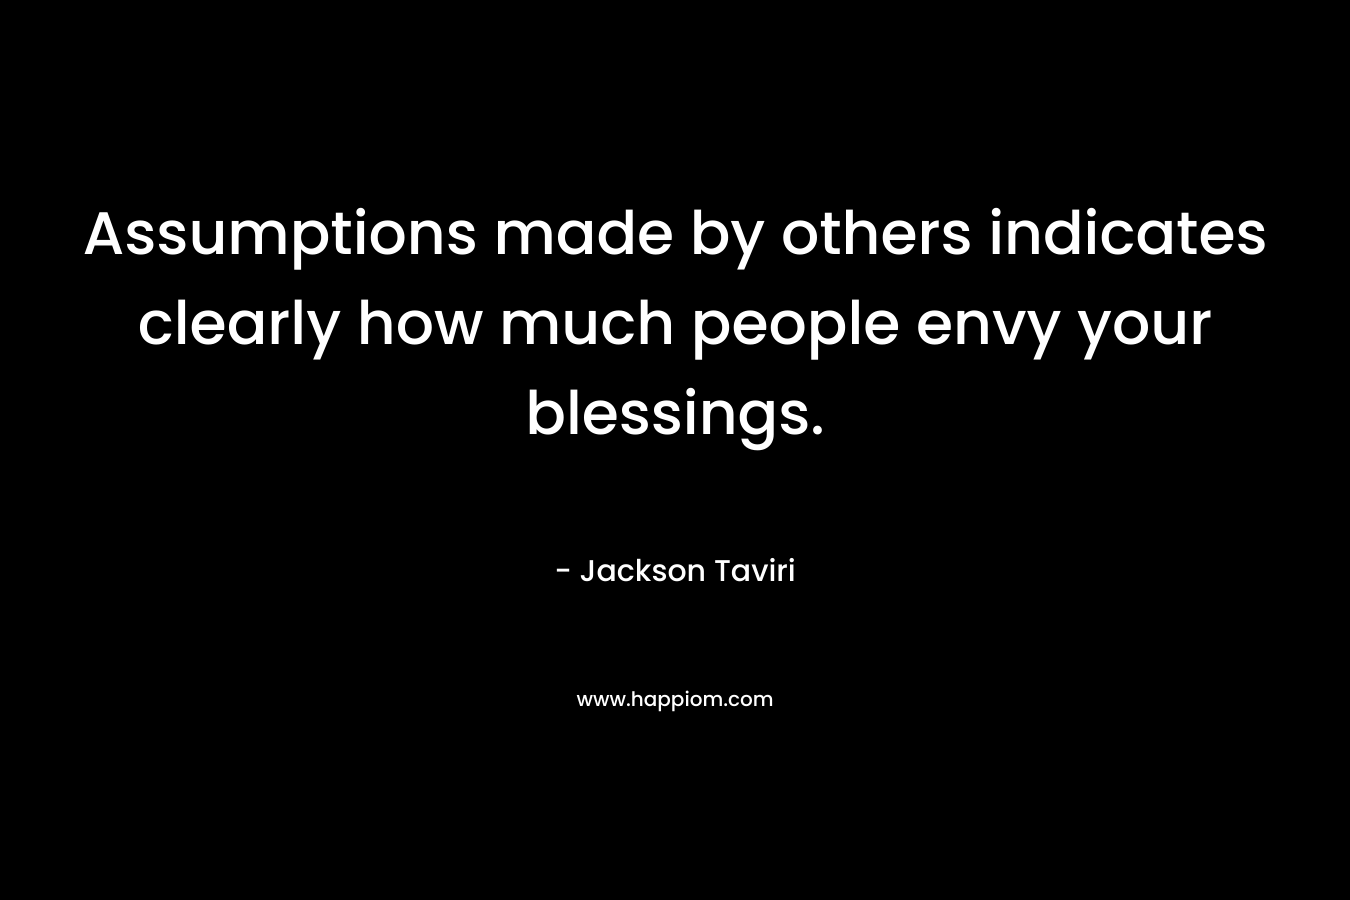 Assumptions made by others indicates clearly how much people envy your blessings. – Jackson Taviri